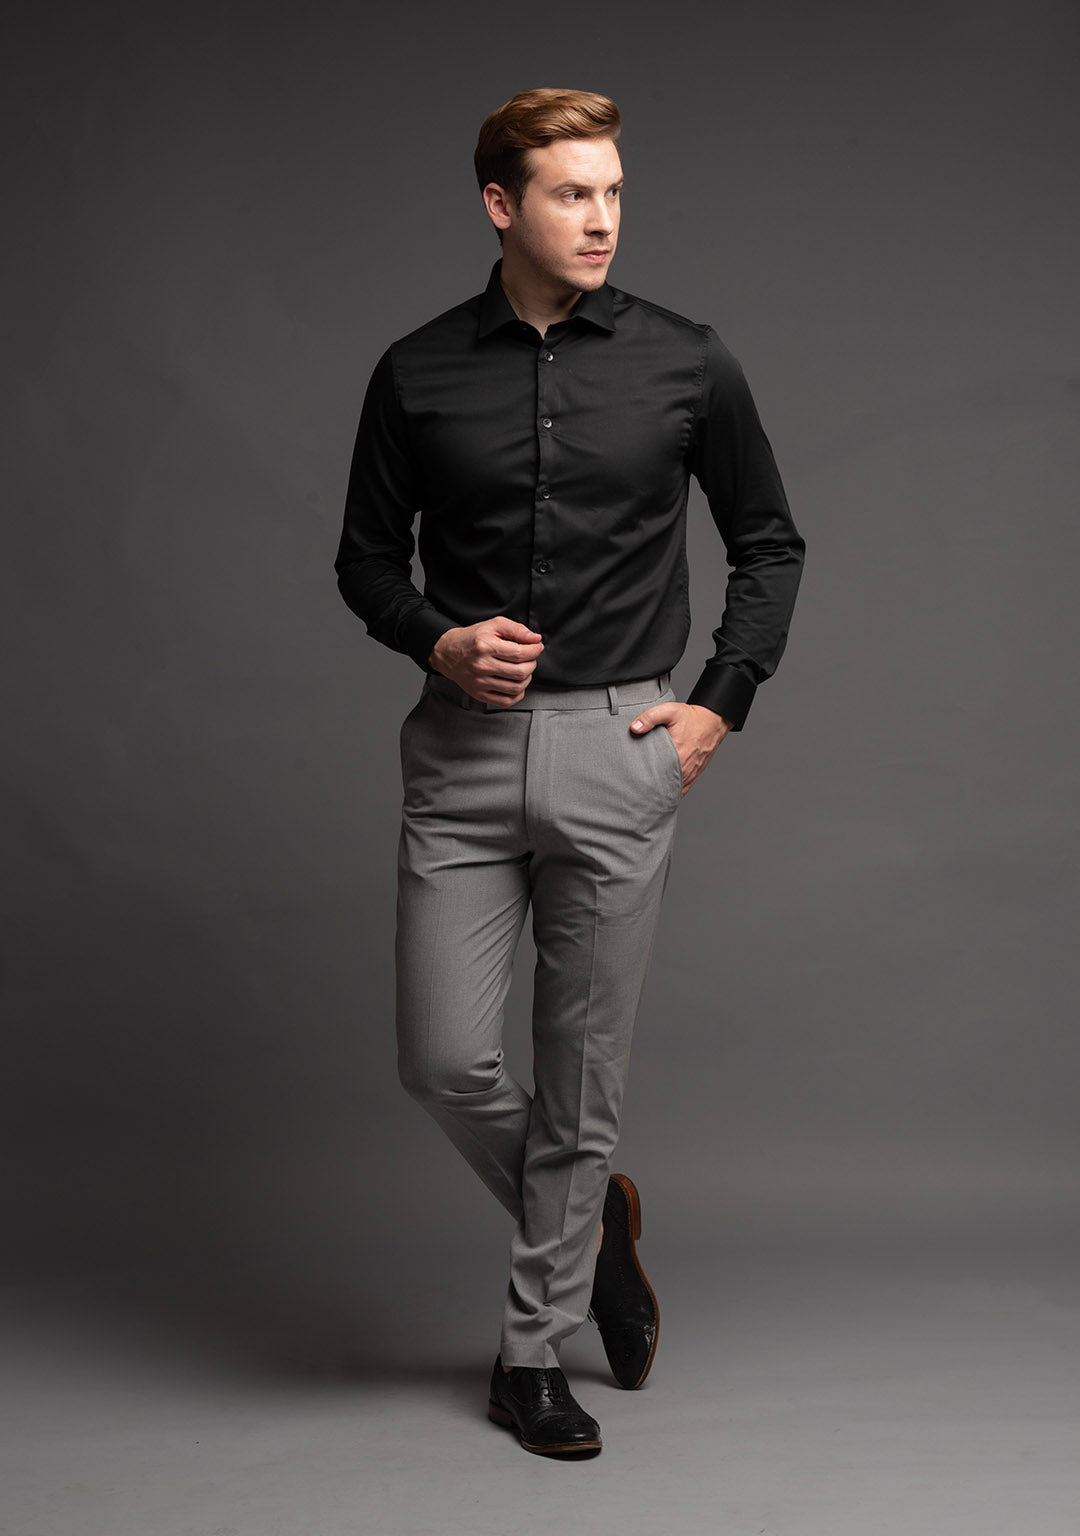 Elite Trousers in Ice Grey